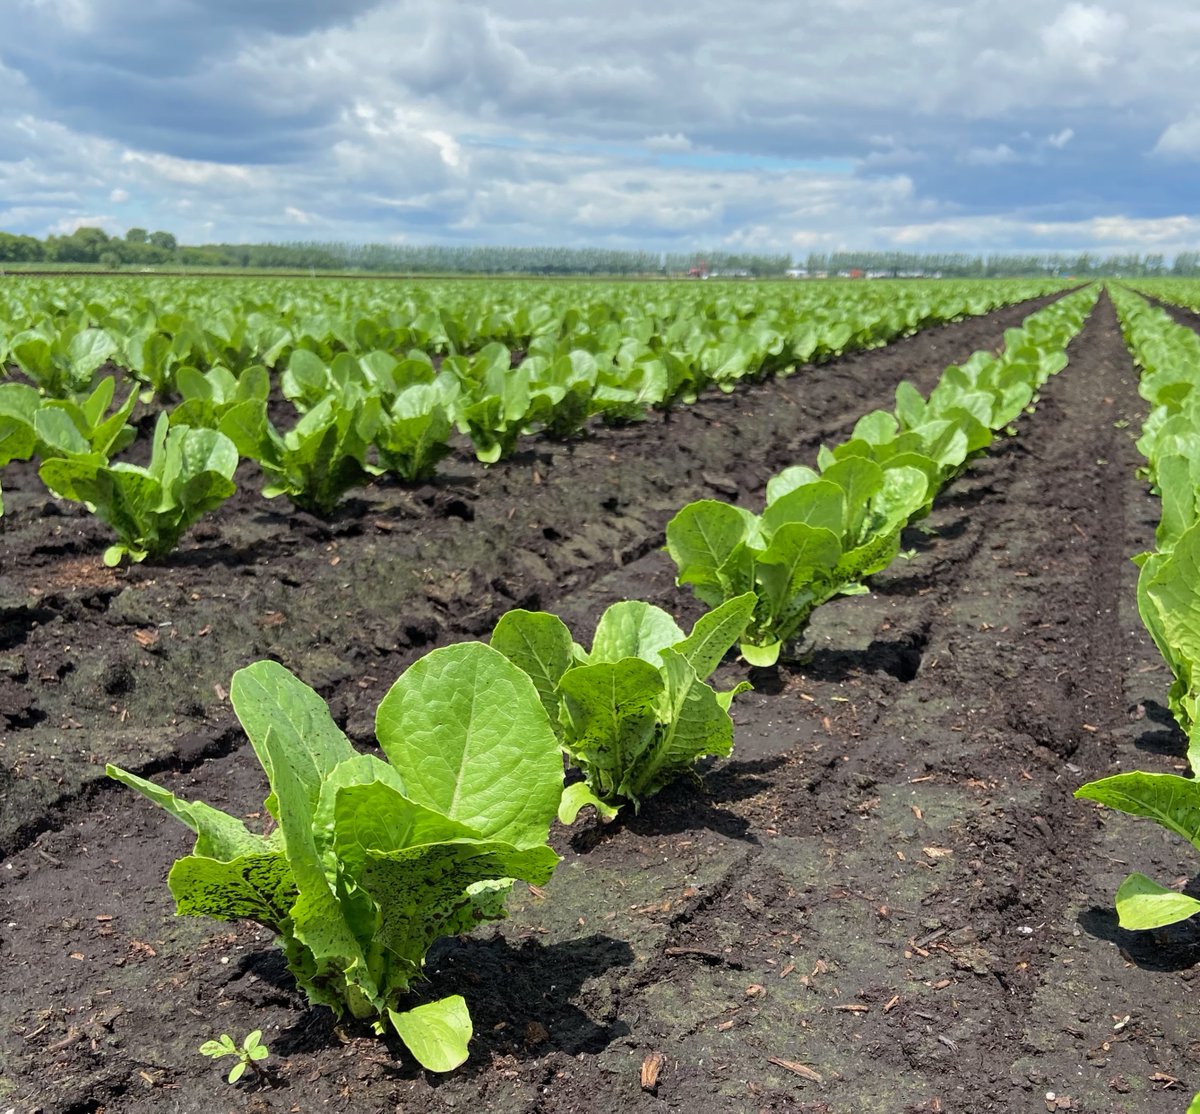 Southwestern Quebec’s high #organic matter soils cover an area of 12,000 hectares or 4% of the southern territory. These organic #soils are of great importance for high-value crops, like leafy greens. Read more here: wp.me/pclOv9-dK.